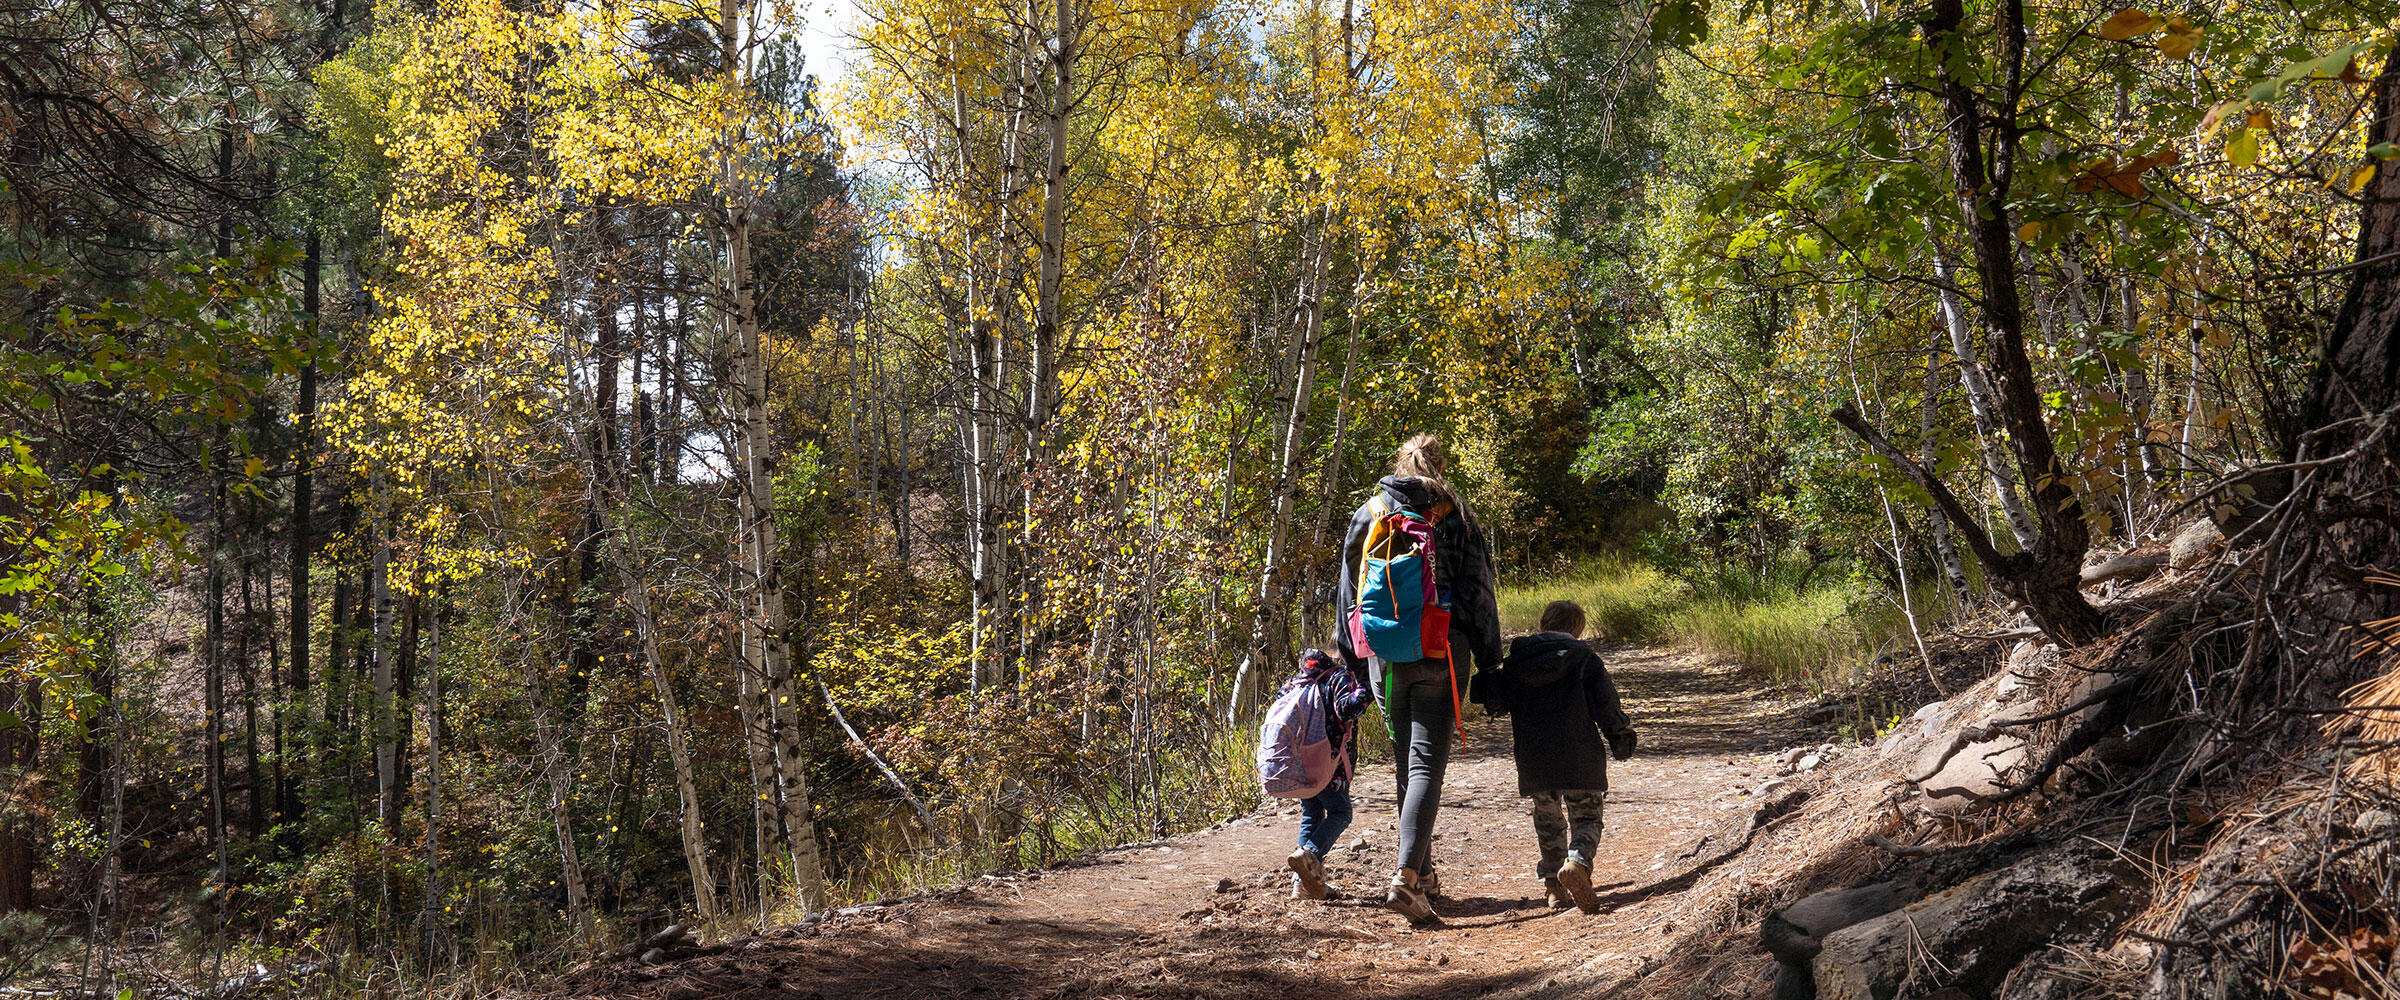 Two children and an adult walk in a forest.